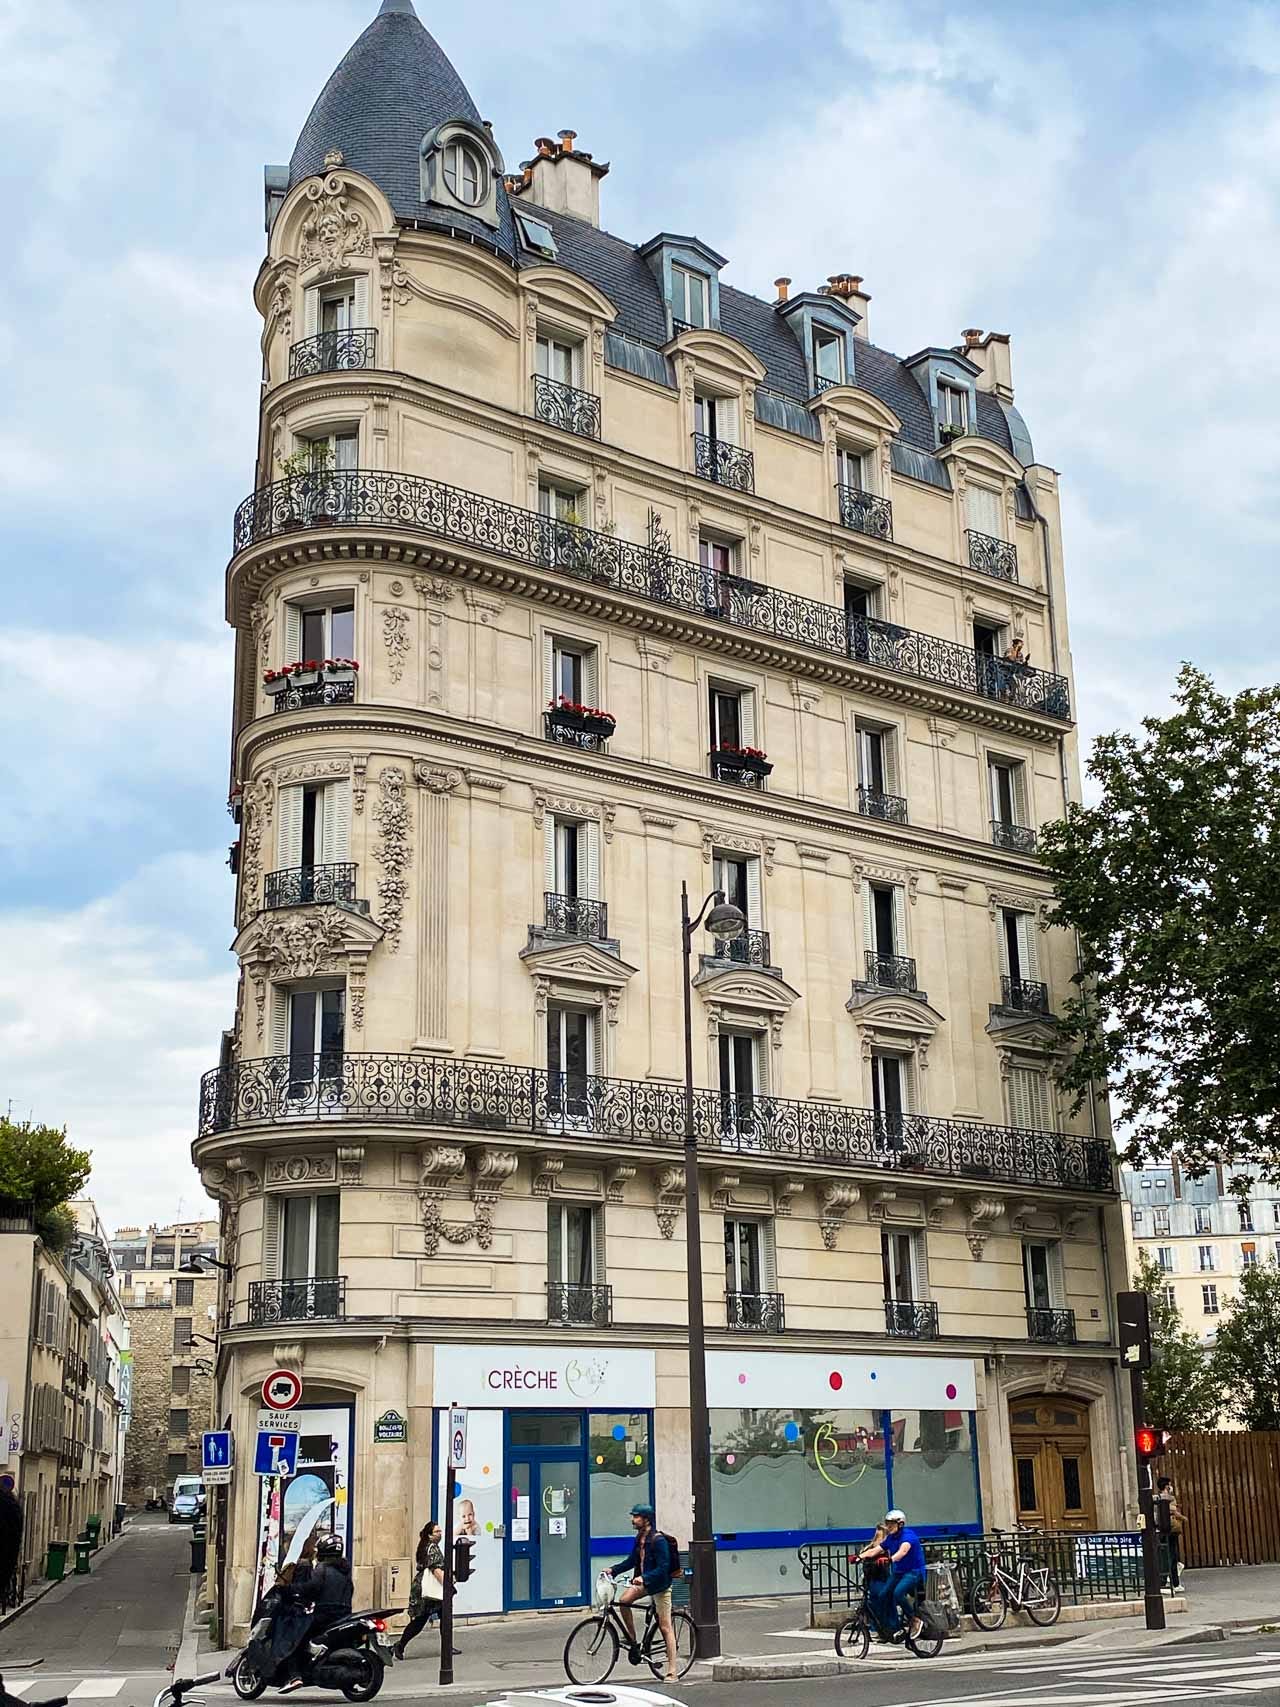 World's oldest department store feels like the streets of Paris